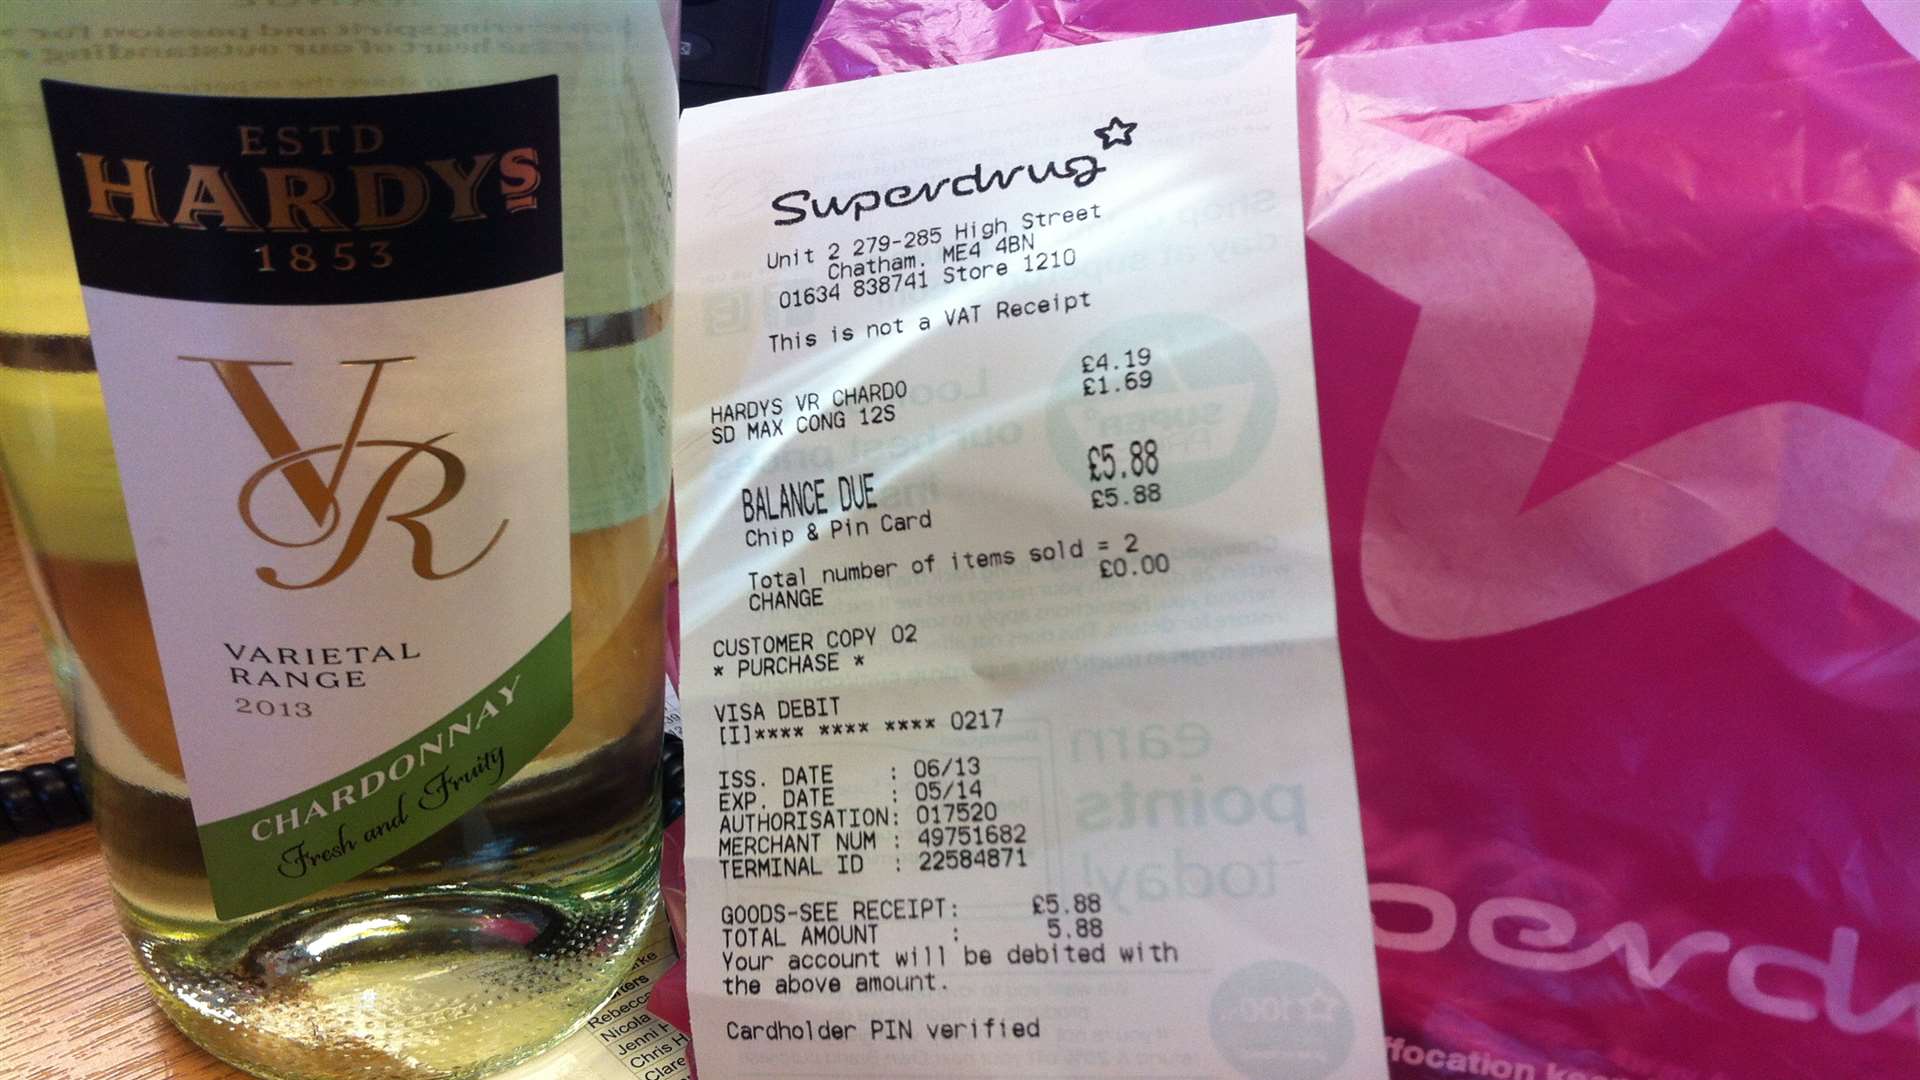 This wine was bought from Superdrug today after the company said it was no longer selling alcohol